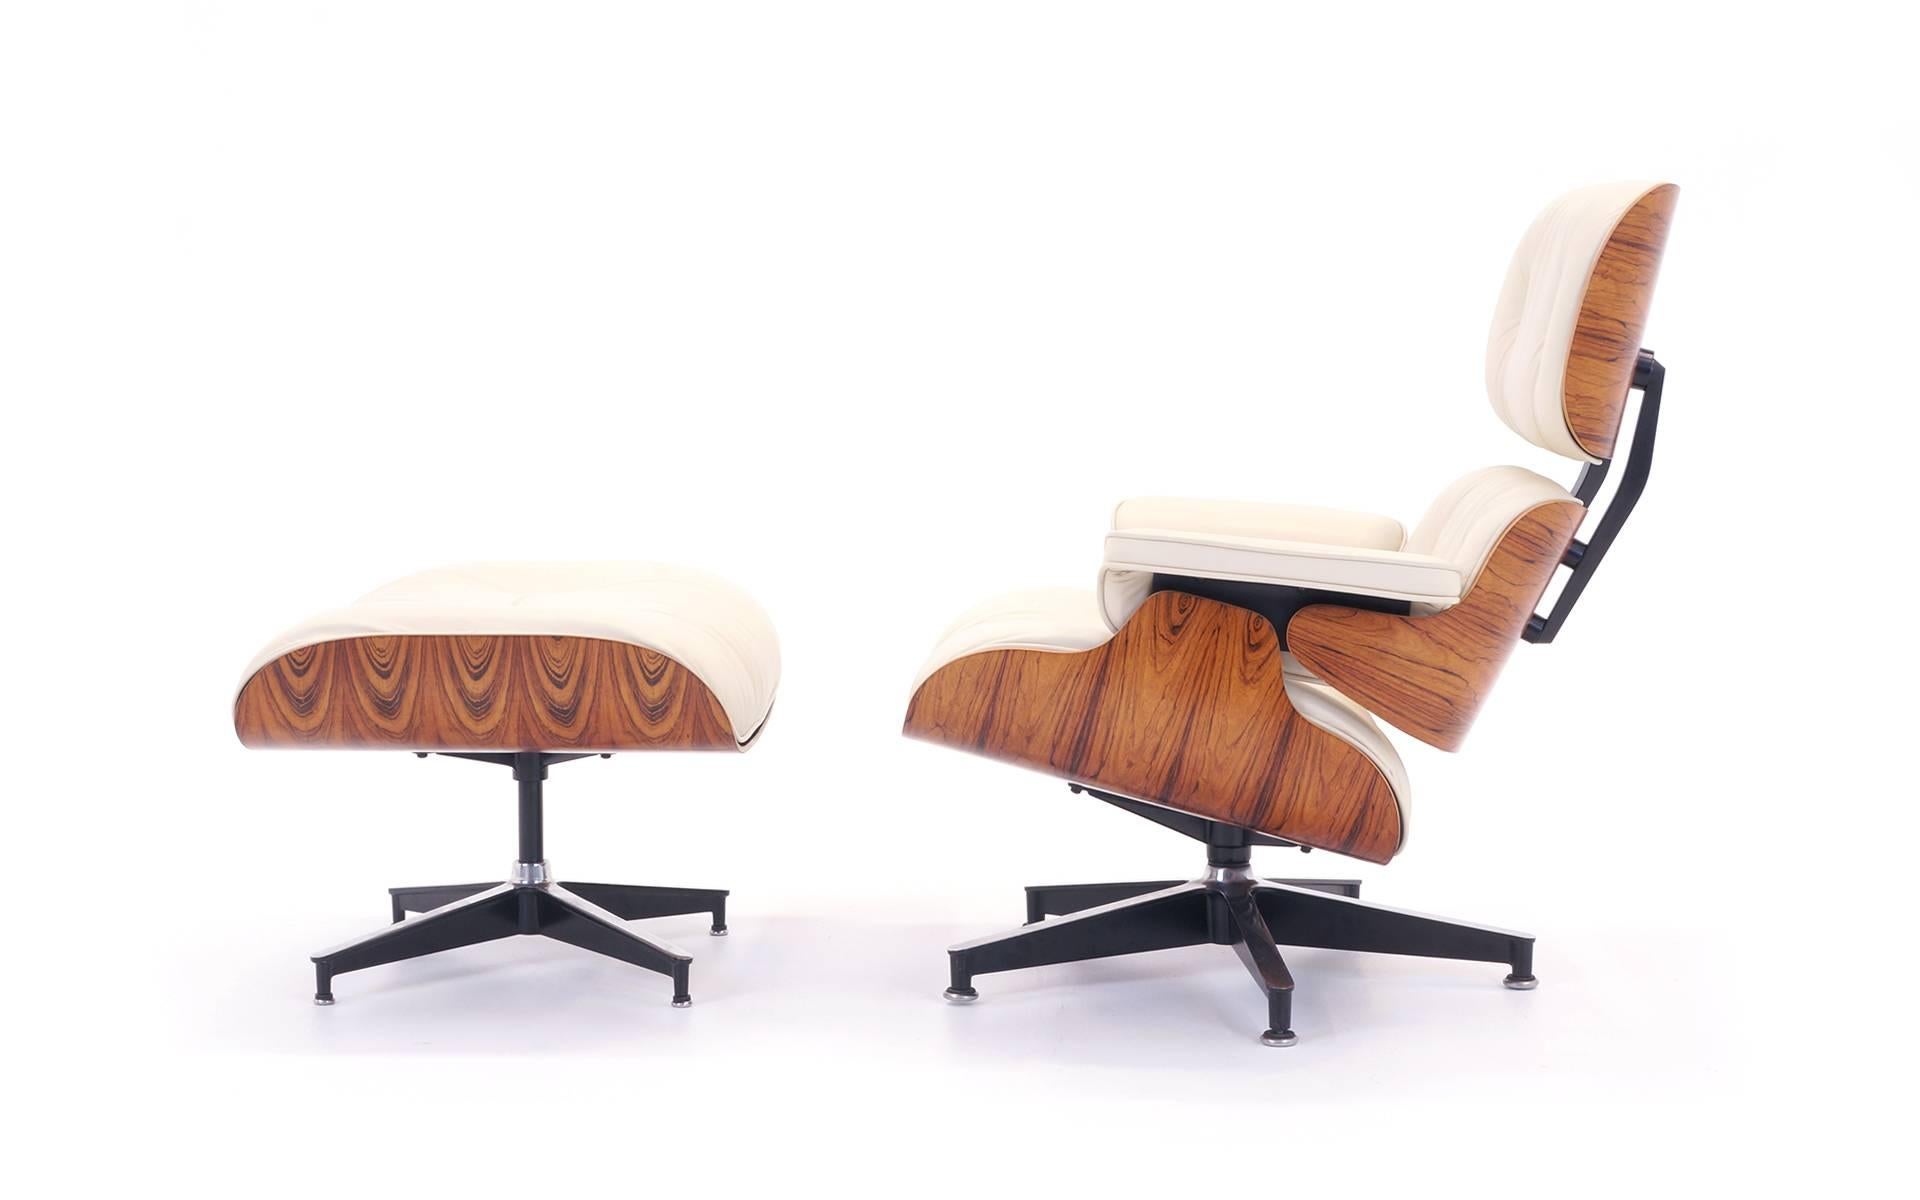 This is the best of both worlds: A 1970s original rosewood Eames chair and ottoman with new Herman Miller ivory cushions. Excellent example of this iconic design. Chair dimensions are below. Ottoman dimensions are:
Height 15 in,
width 25.5